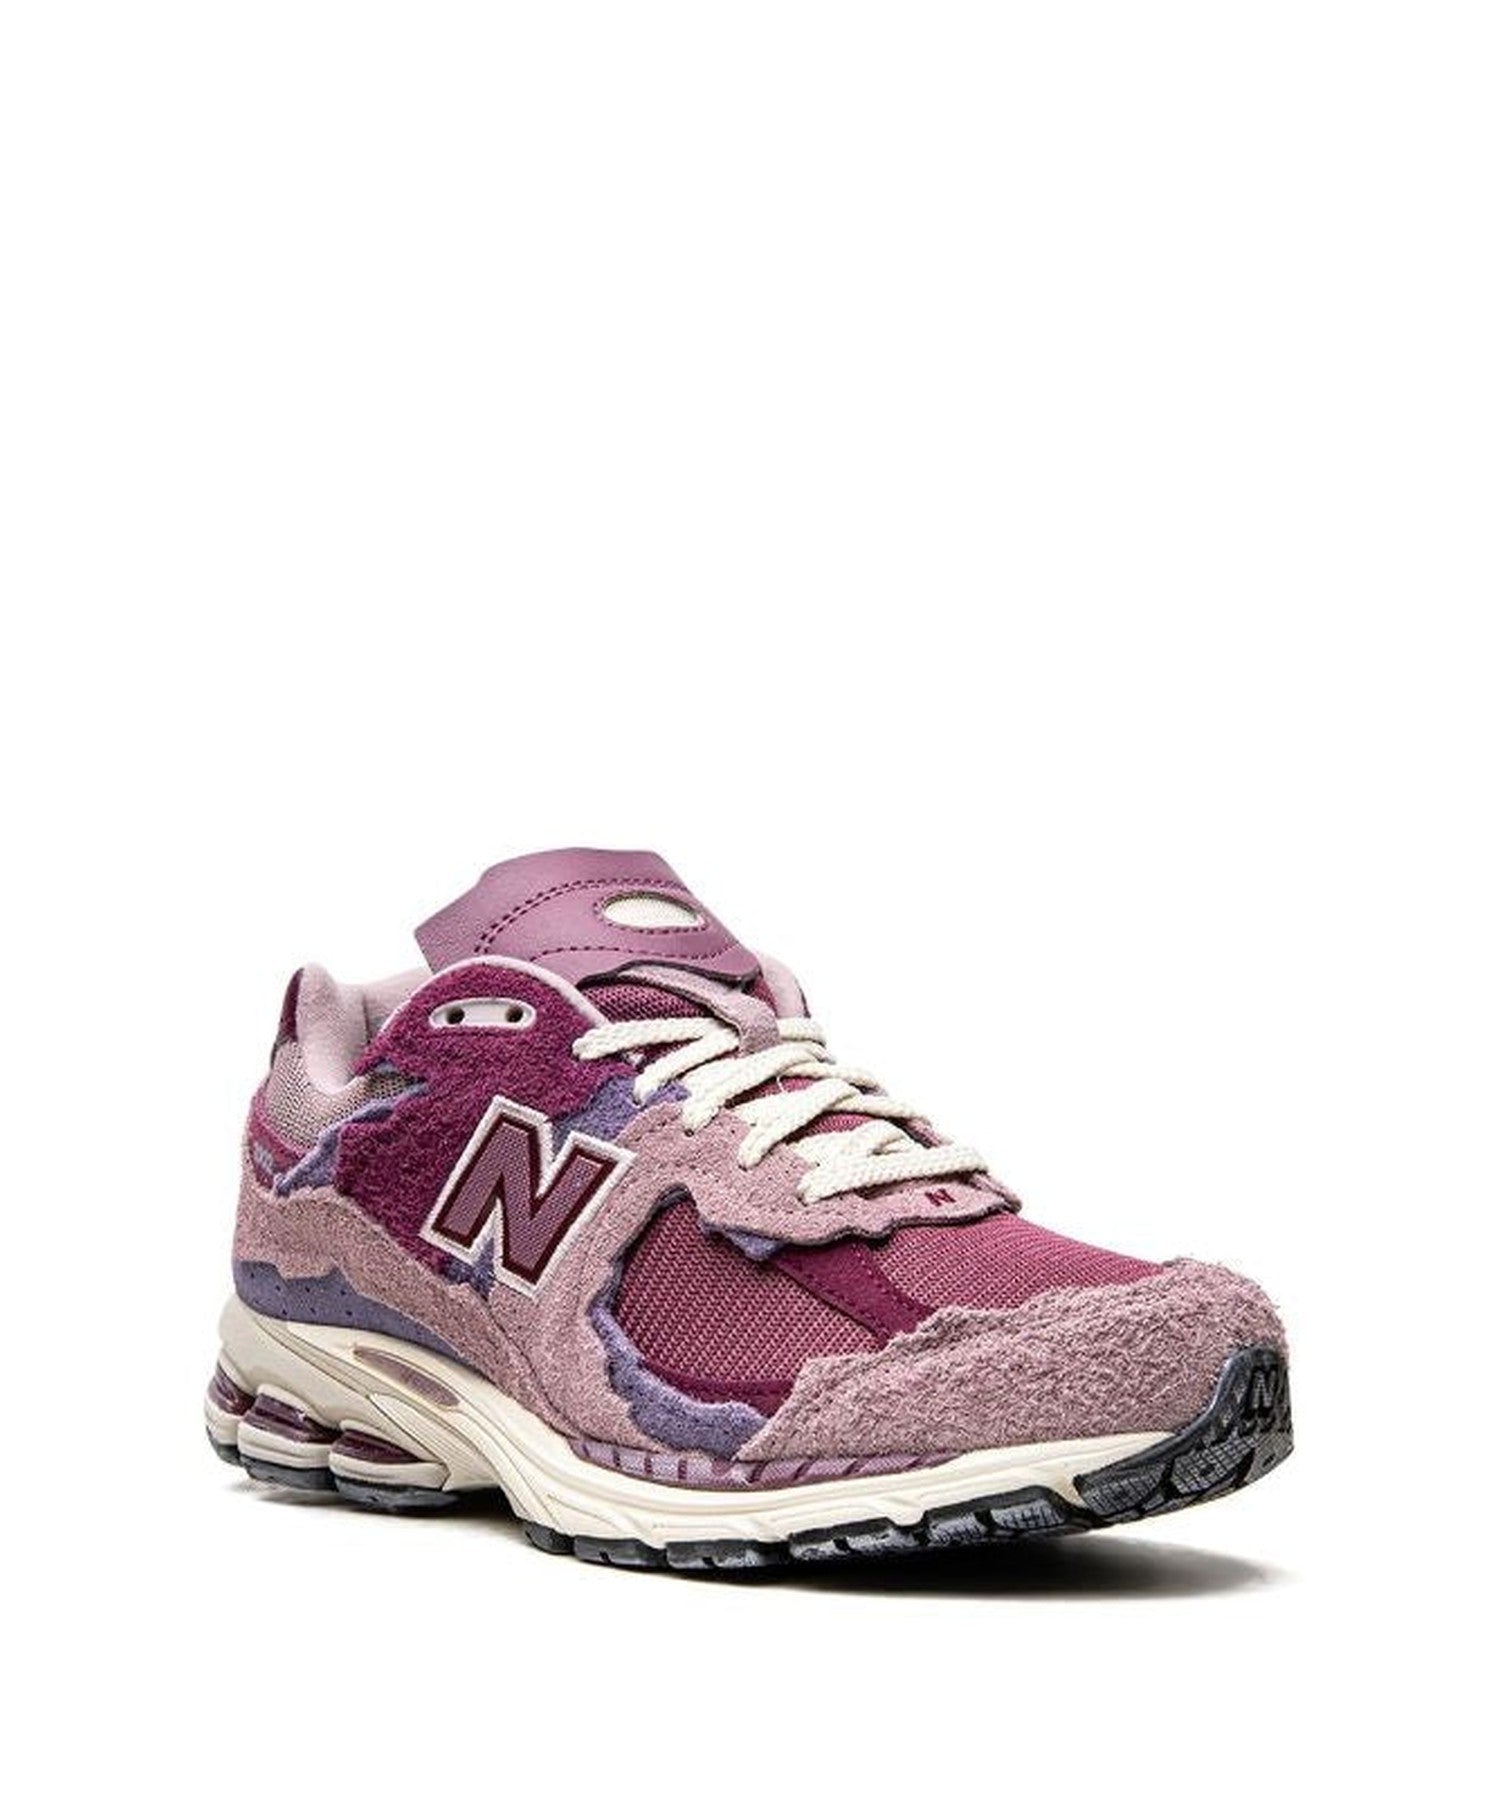 New Balance 2002R "Protection Pack - Violet" sneakers